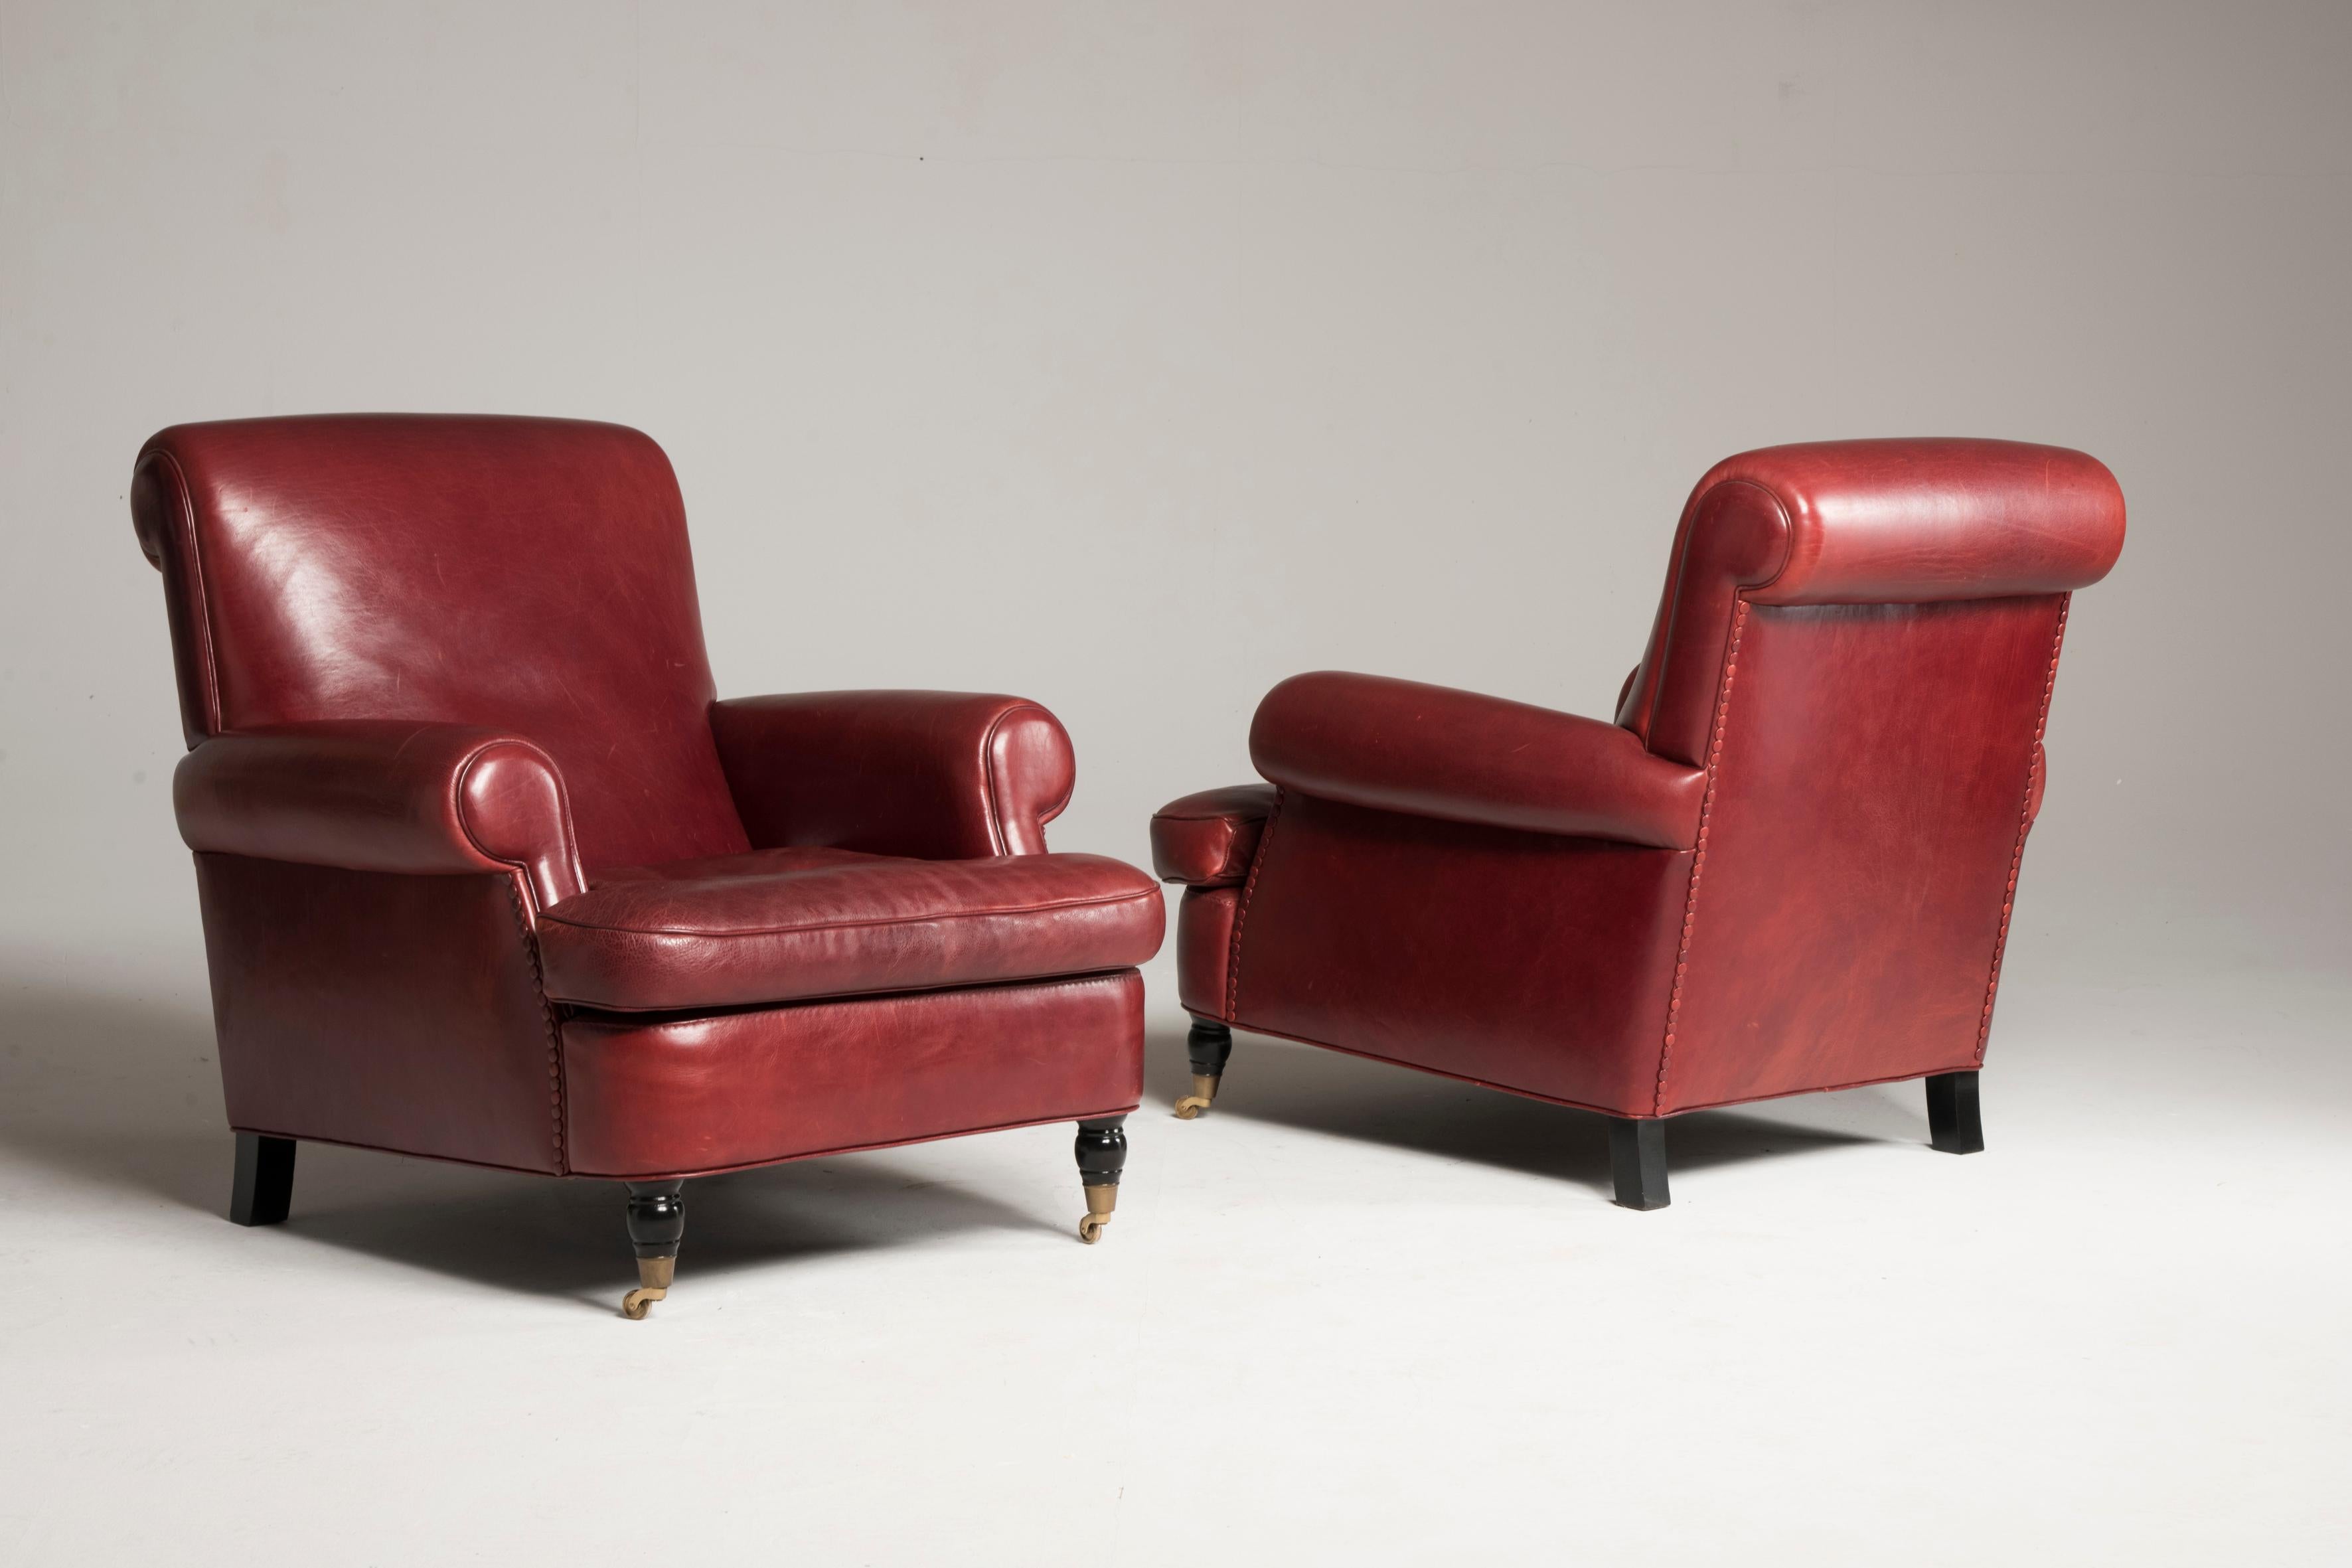 2000s Baxter Bordeaux charlotte model armchairs. Designer: Piero Lissoni, 2002.
Reinterpretation of classic design in modern key, the Charlotte Longe armchair is characterized by wide armrests and by a reclined backrest for a relaxing seating.